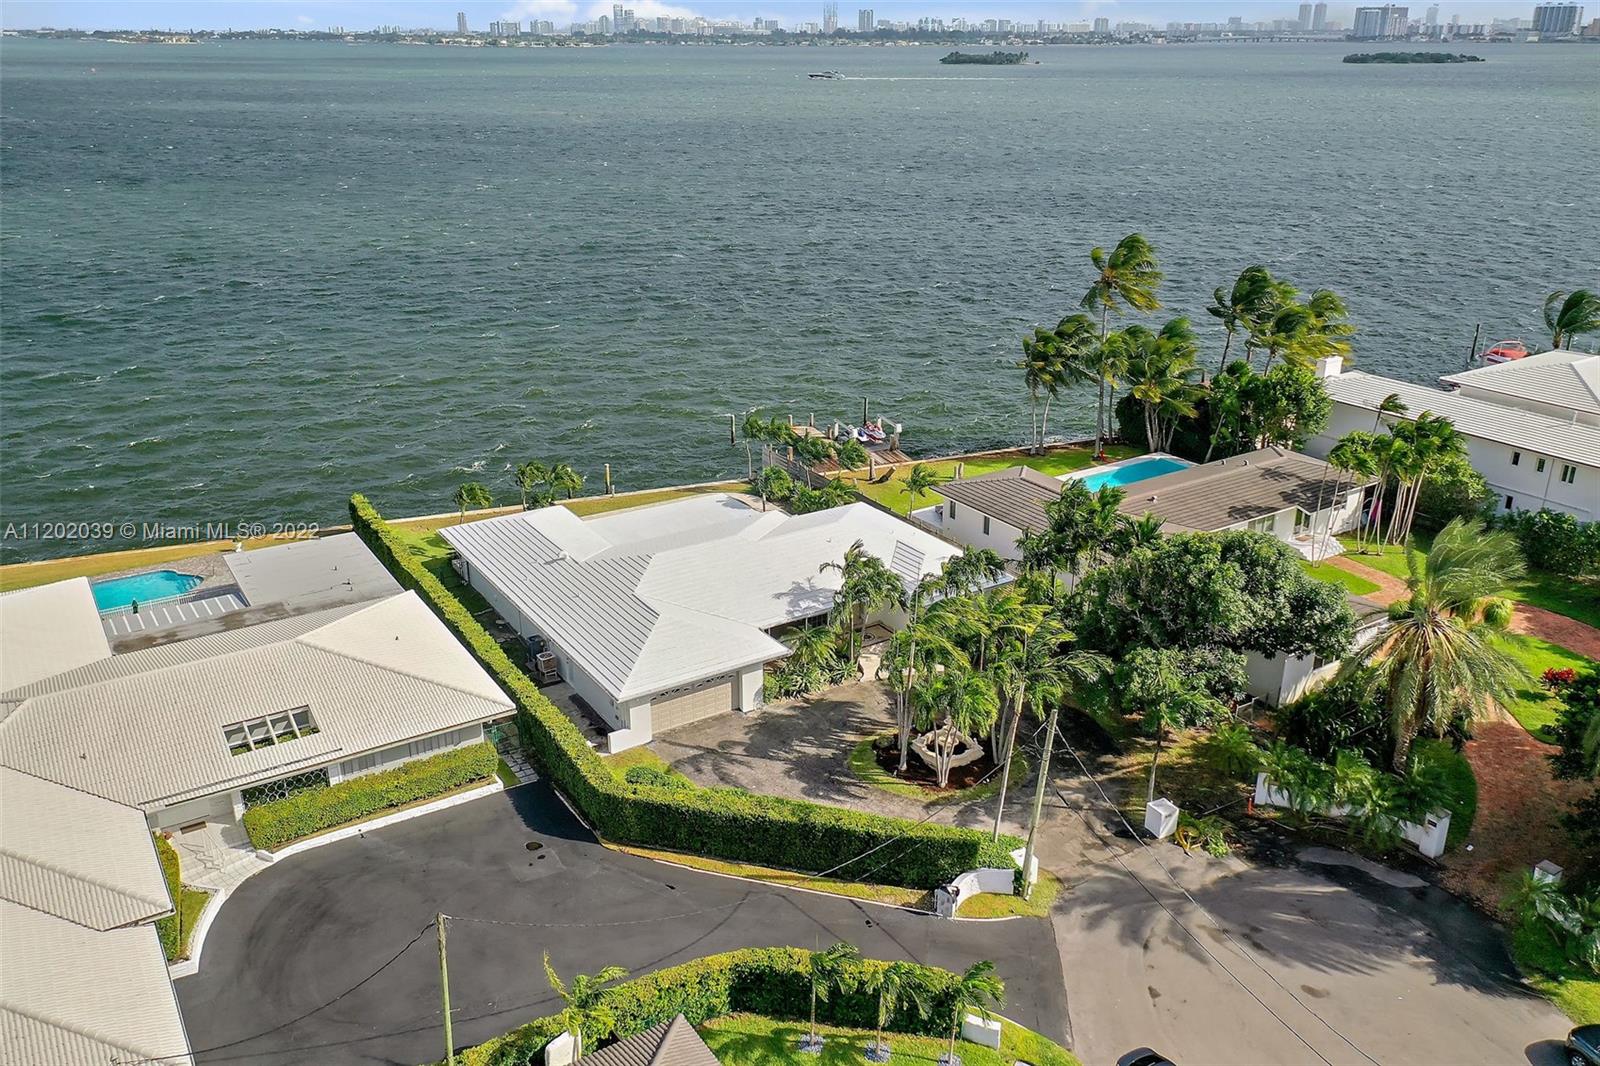 This home delivers Iconic Old Florida living on the open Biscayne Bay in red hot Village of Miami Shores. Located on a spacious lot w/ dramatic bay views facing East for striking sun rises & sunburst sunsets overlooking the blue waters of the Biscayne Bay! The open & sprawling interior floor plan creates an expansive flow of the living area. Covered outdoor deck perfect for entertaining guest both inside & out. Pool home w/views of the bay All bedrooms are en-suite plus an additional half bath "powder room" for guests. The master BR is situated off the backyard w/striking views of the pool & bay. 2nd & third bedroom suites are on the opposite wing creating privacy for kids & guests. Full amenity family driven community w/ a Village Council, Country Club, Tennis, Police Dept.,